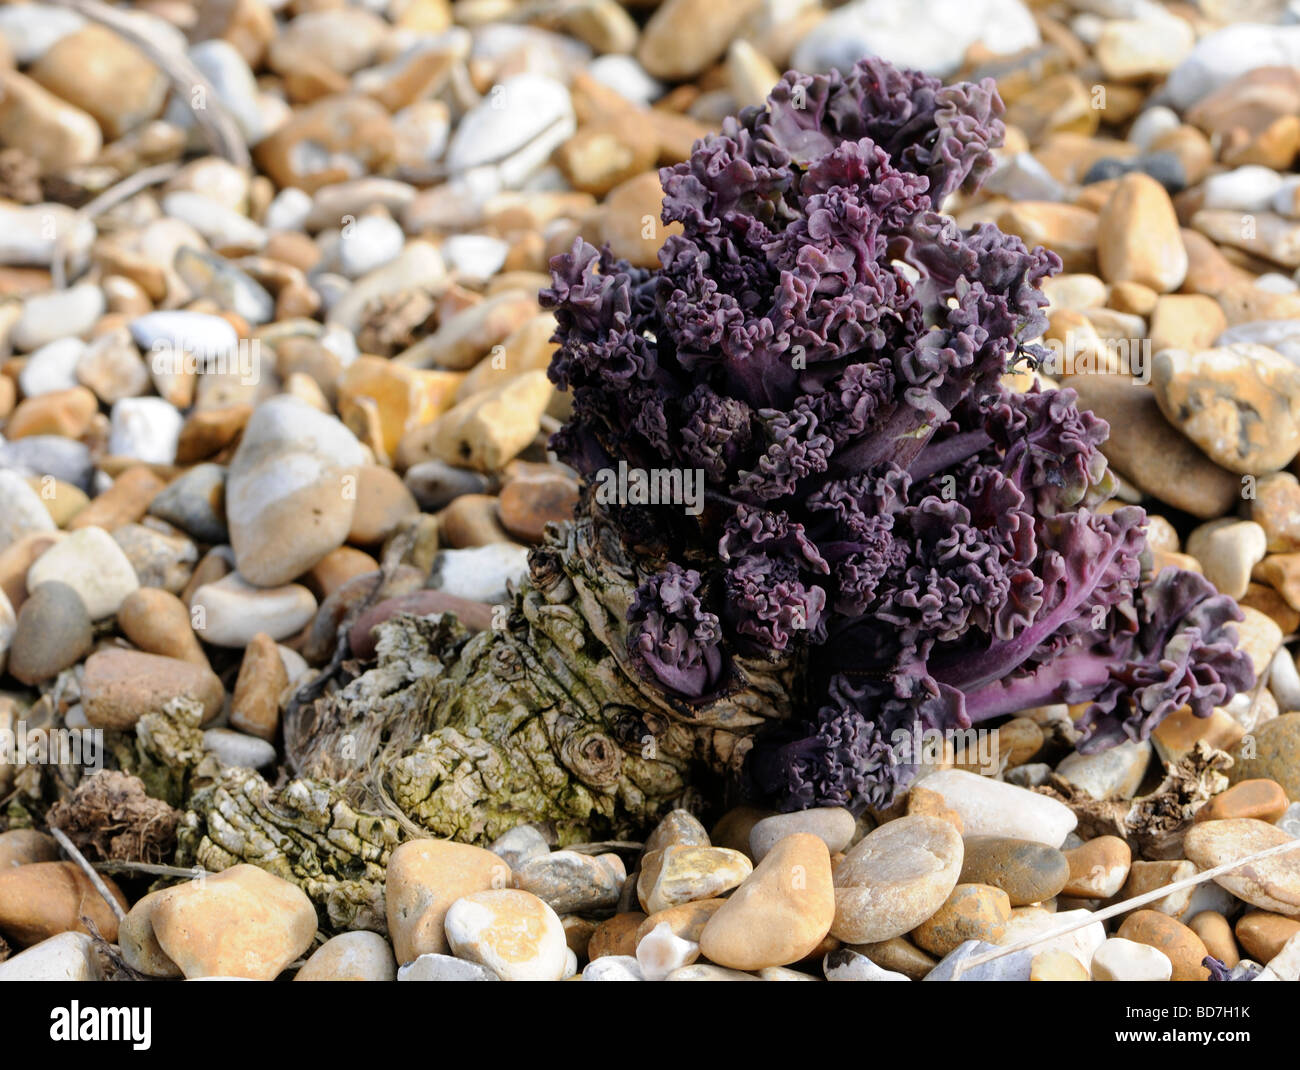 Sea Kale (Crambe maritima) on a pebble beach. New sprouts are growing from an old tap root extending deep into the shingle. Stock Photo